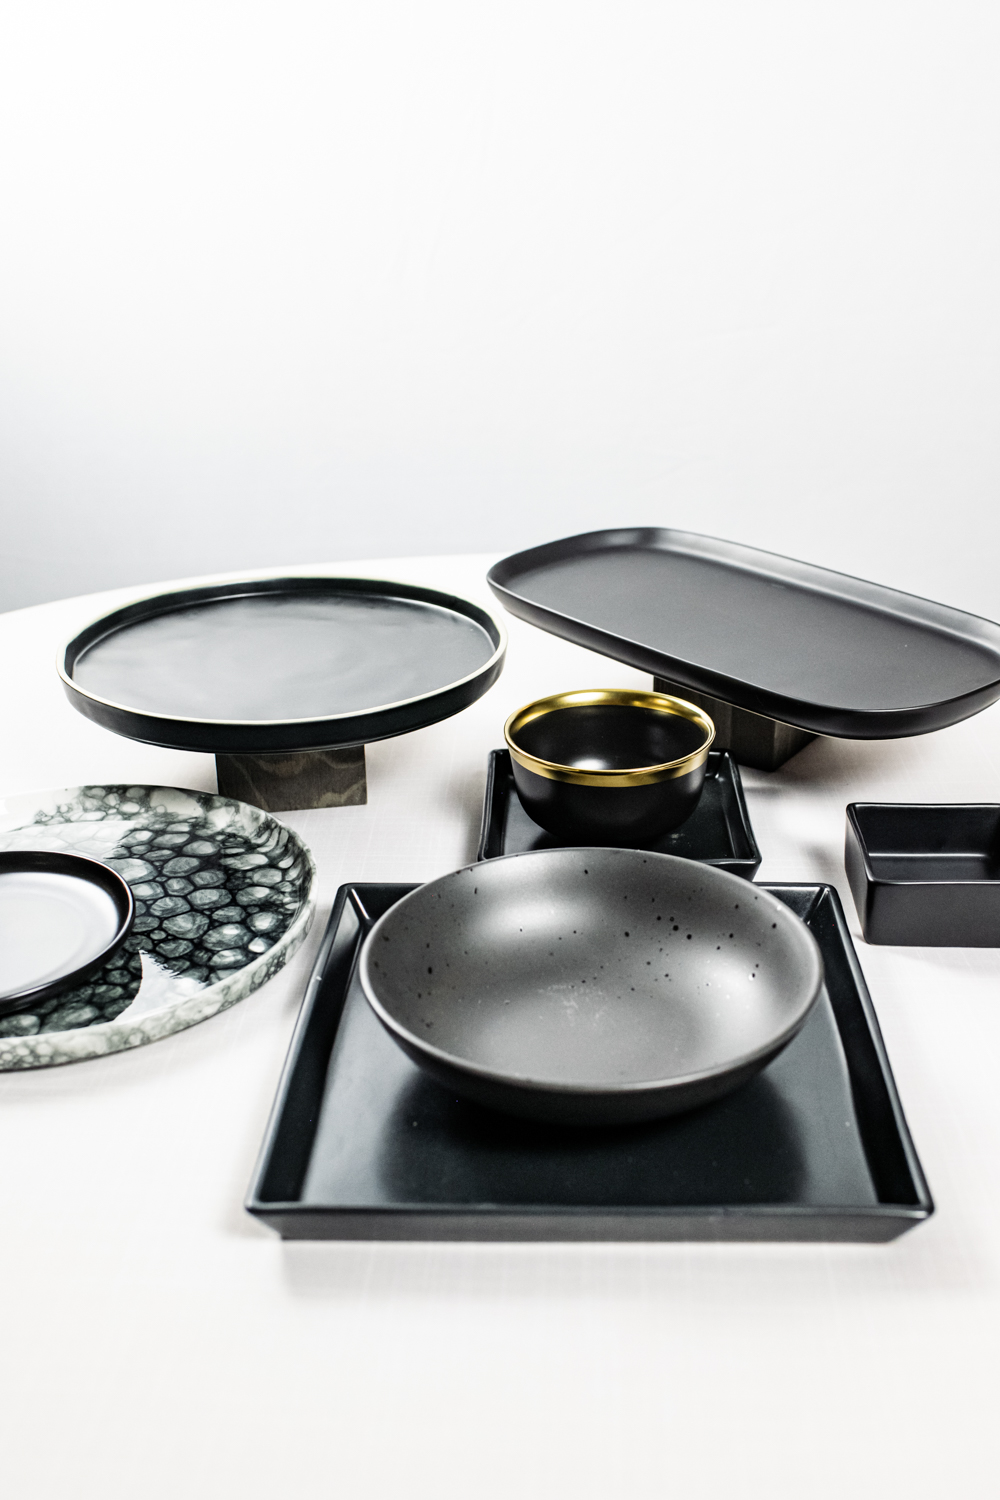 collection of serve ware and dishes for copper kitchen lookbook